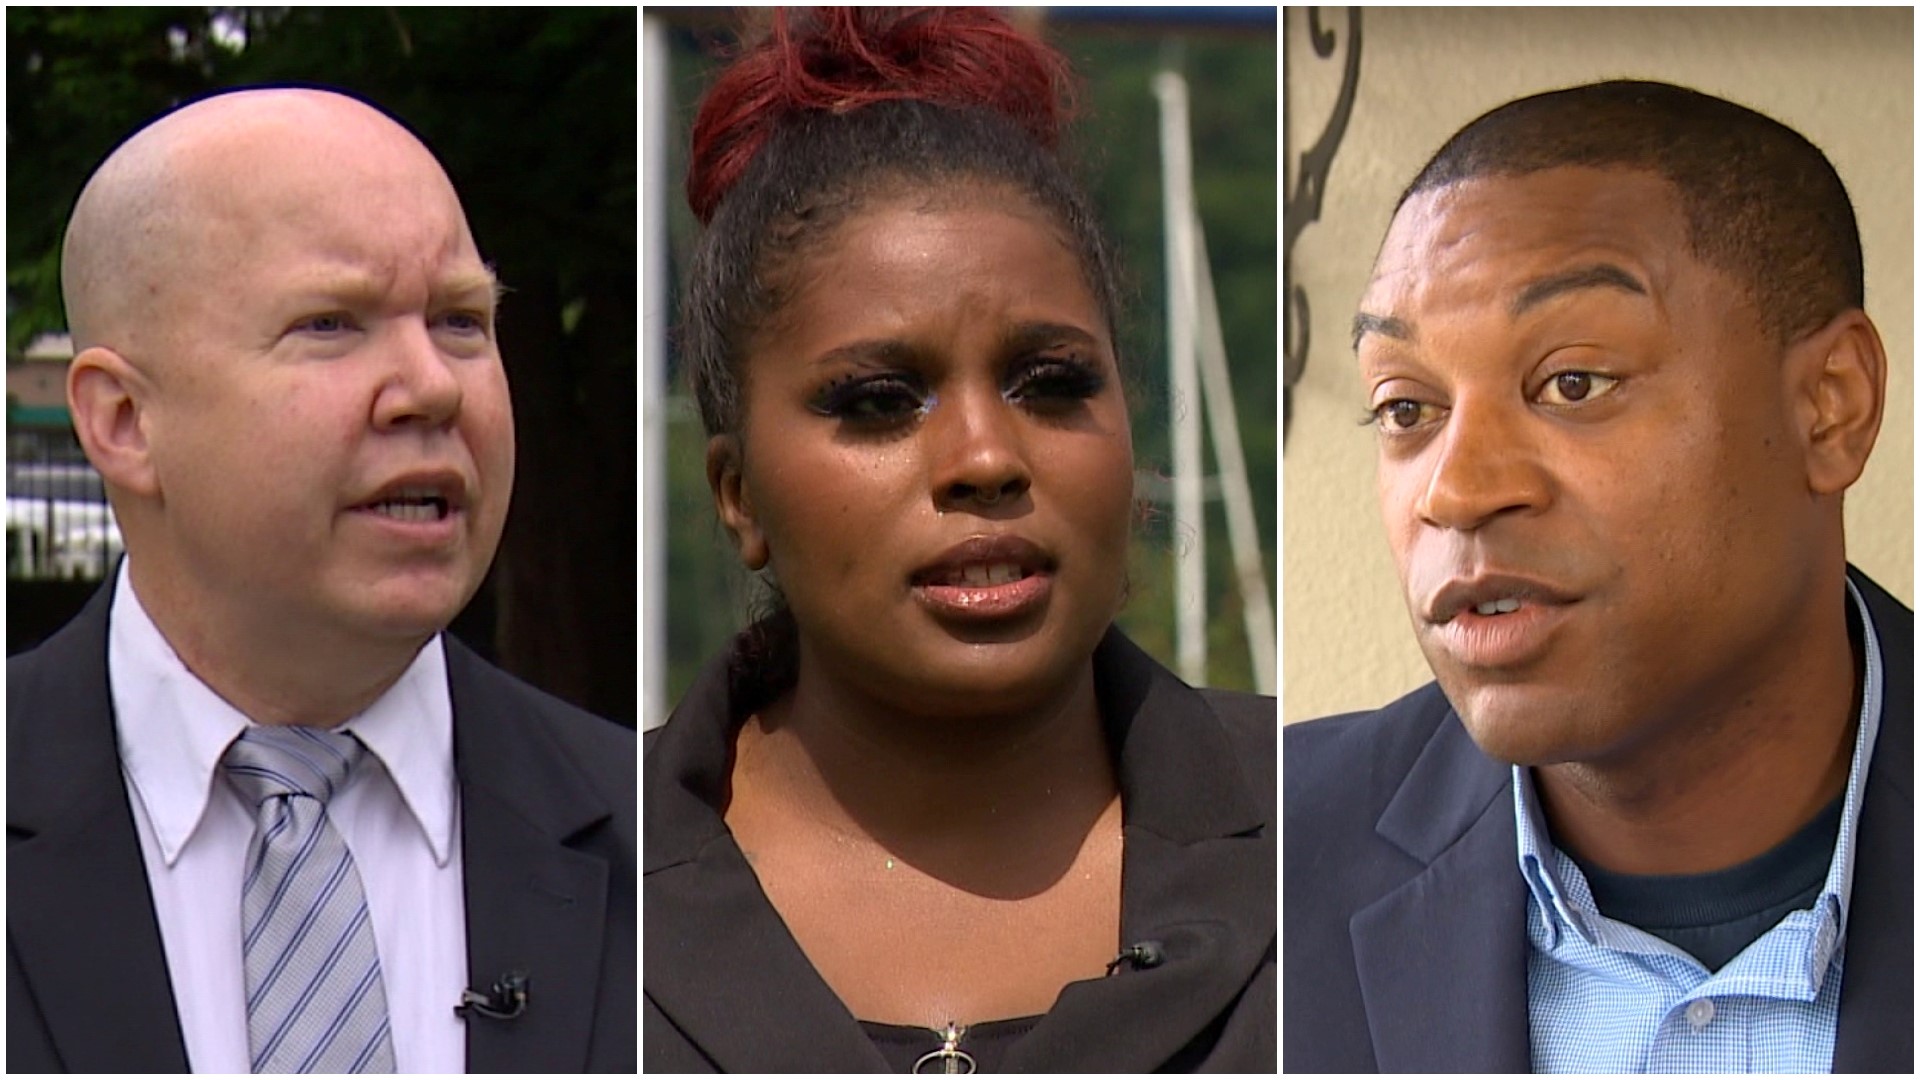 Olympia Mayor Cheryl Selby isn't running for re-election. Candidates Dontae Payne, David Ross and Desiree Chantal Toliver face off in the Aug. 1 primary election.